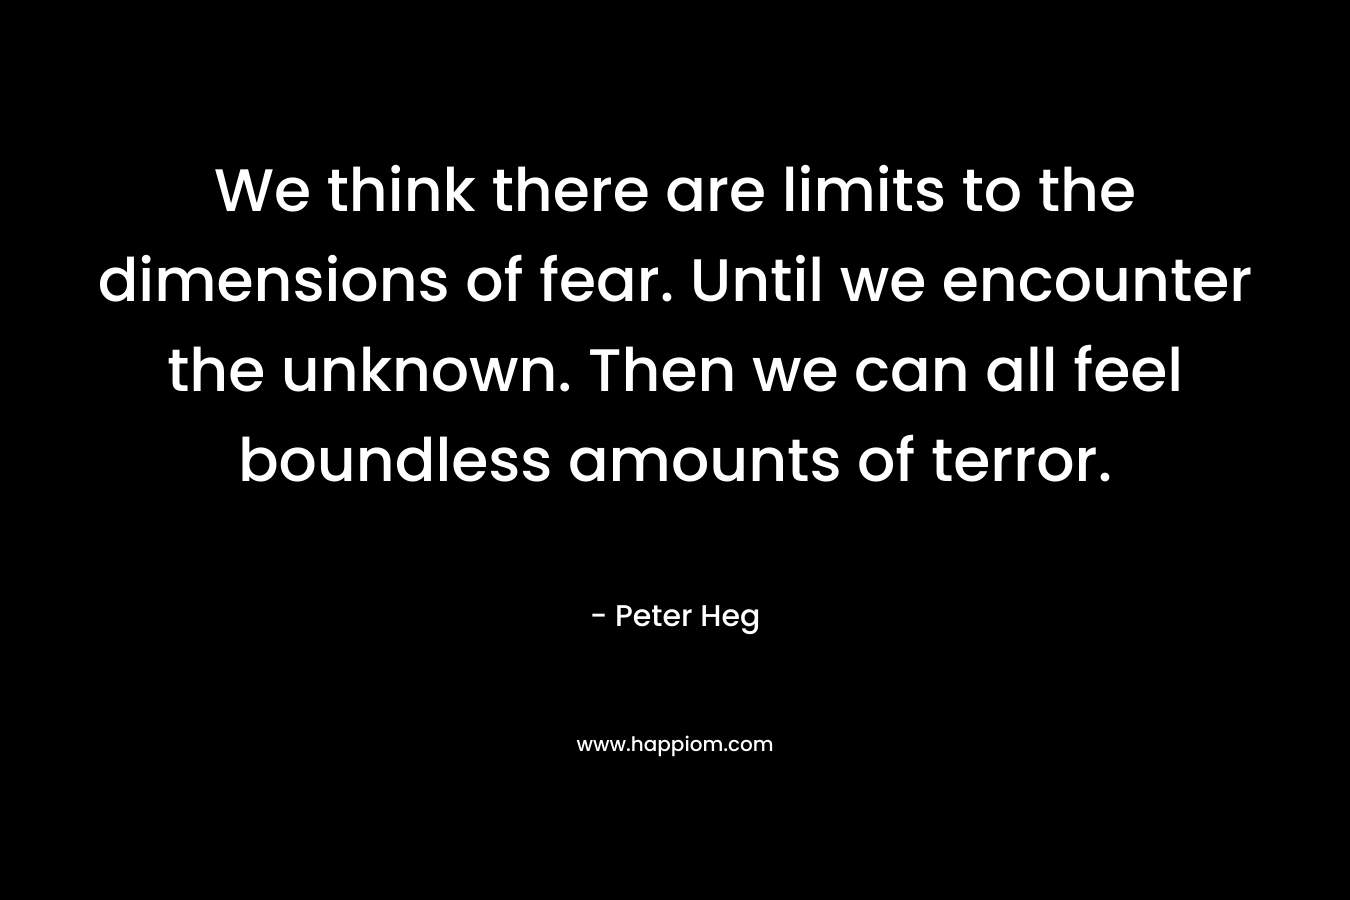 We think there are limits to the dimensions of fear. Until we encounter the unknown. Then we can all feel boundless amounts of terror.